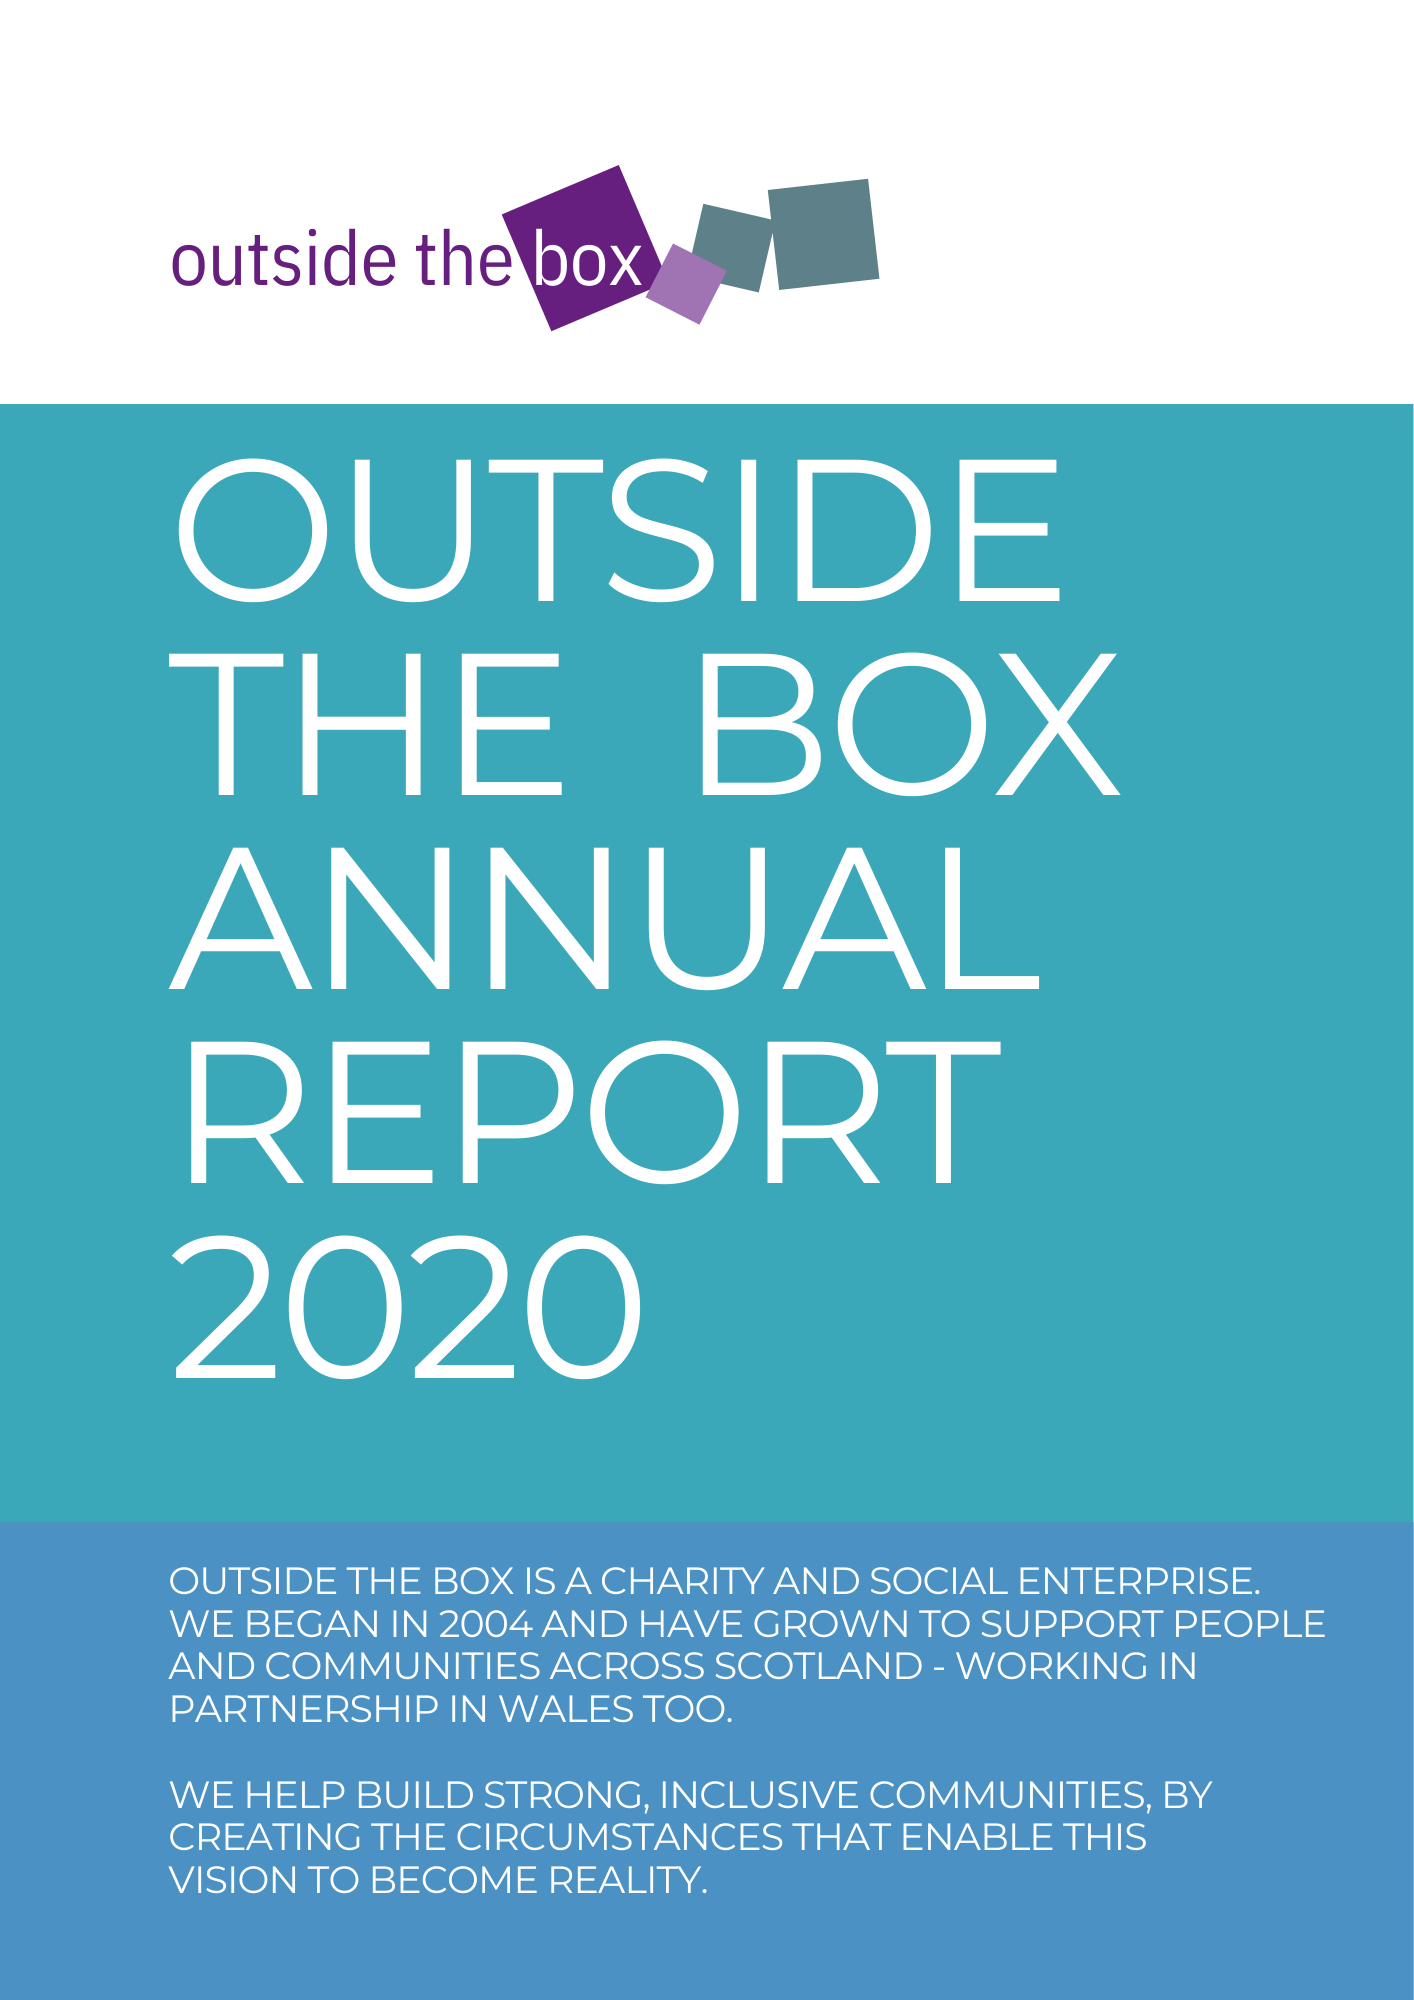 Outside the box annual report 2020